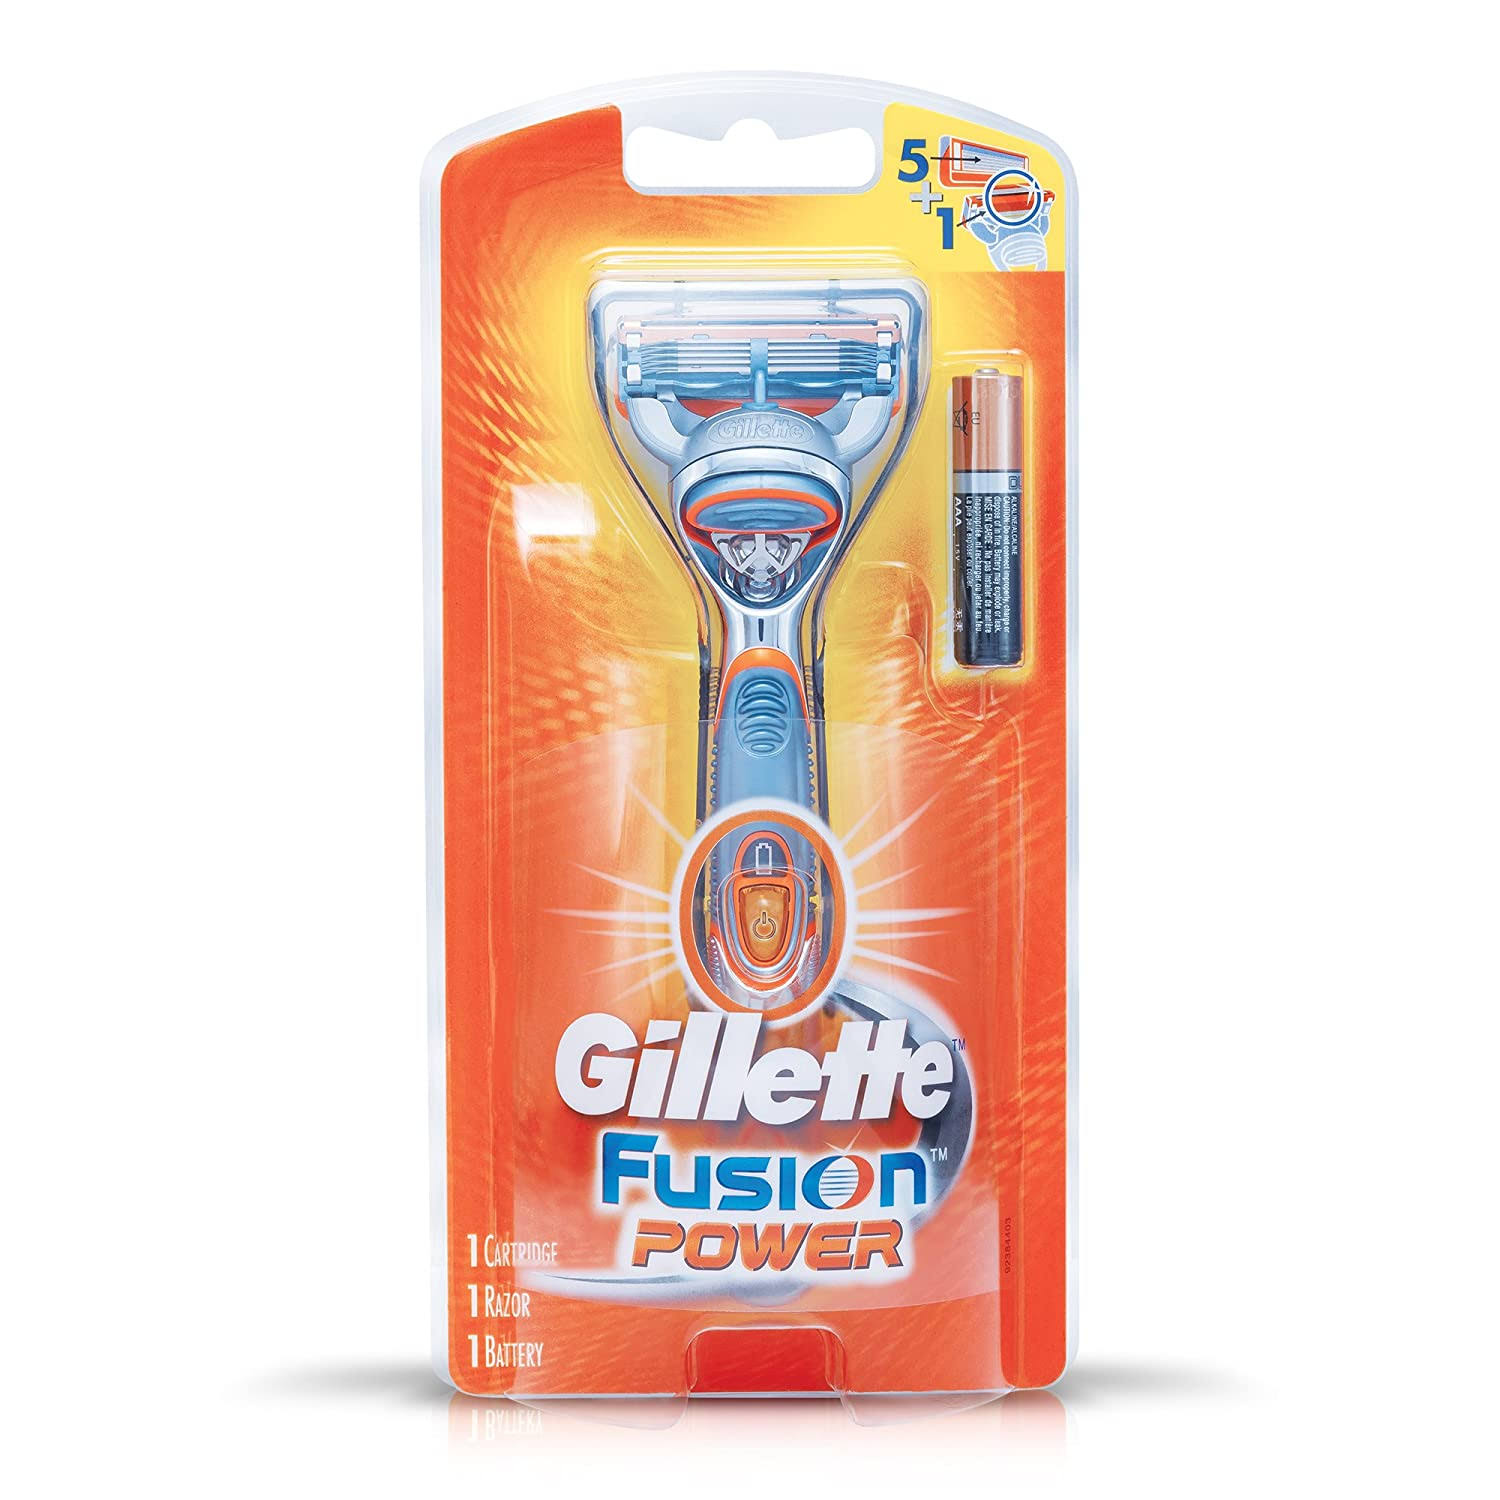 Gillette Fusion Power Handle with 1 Cartridge, Battery Operated